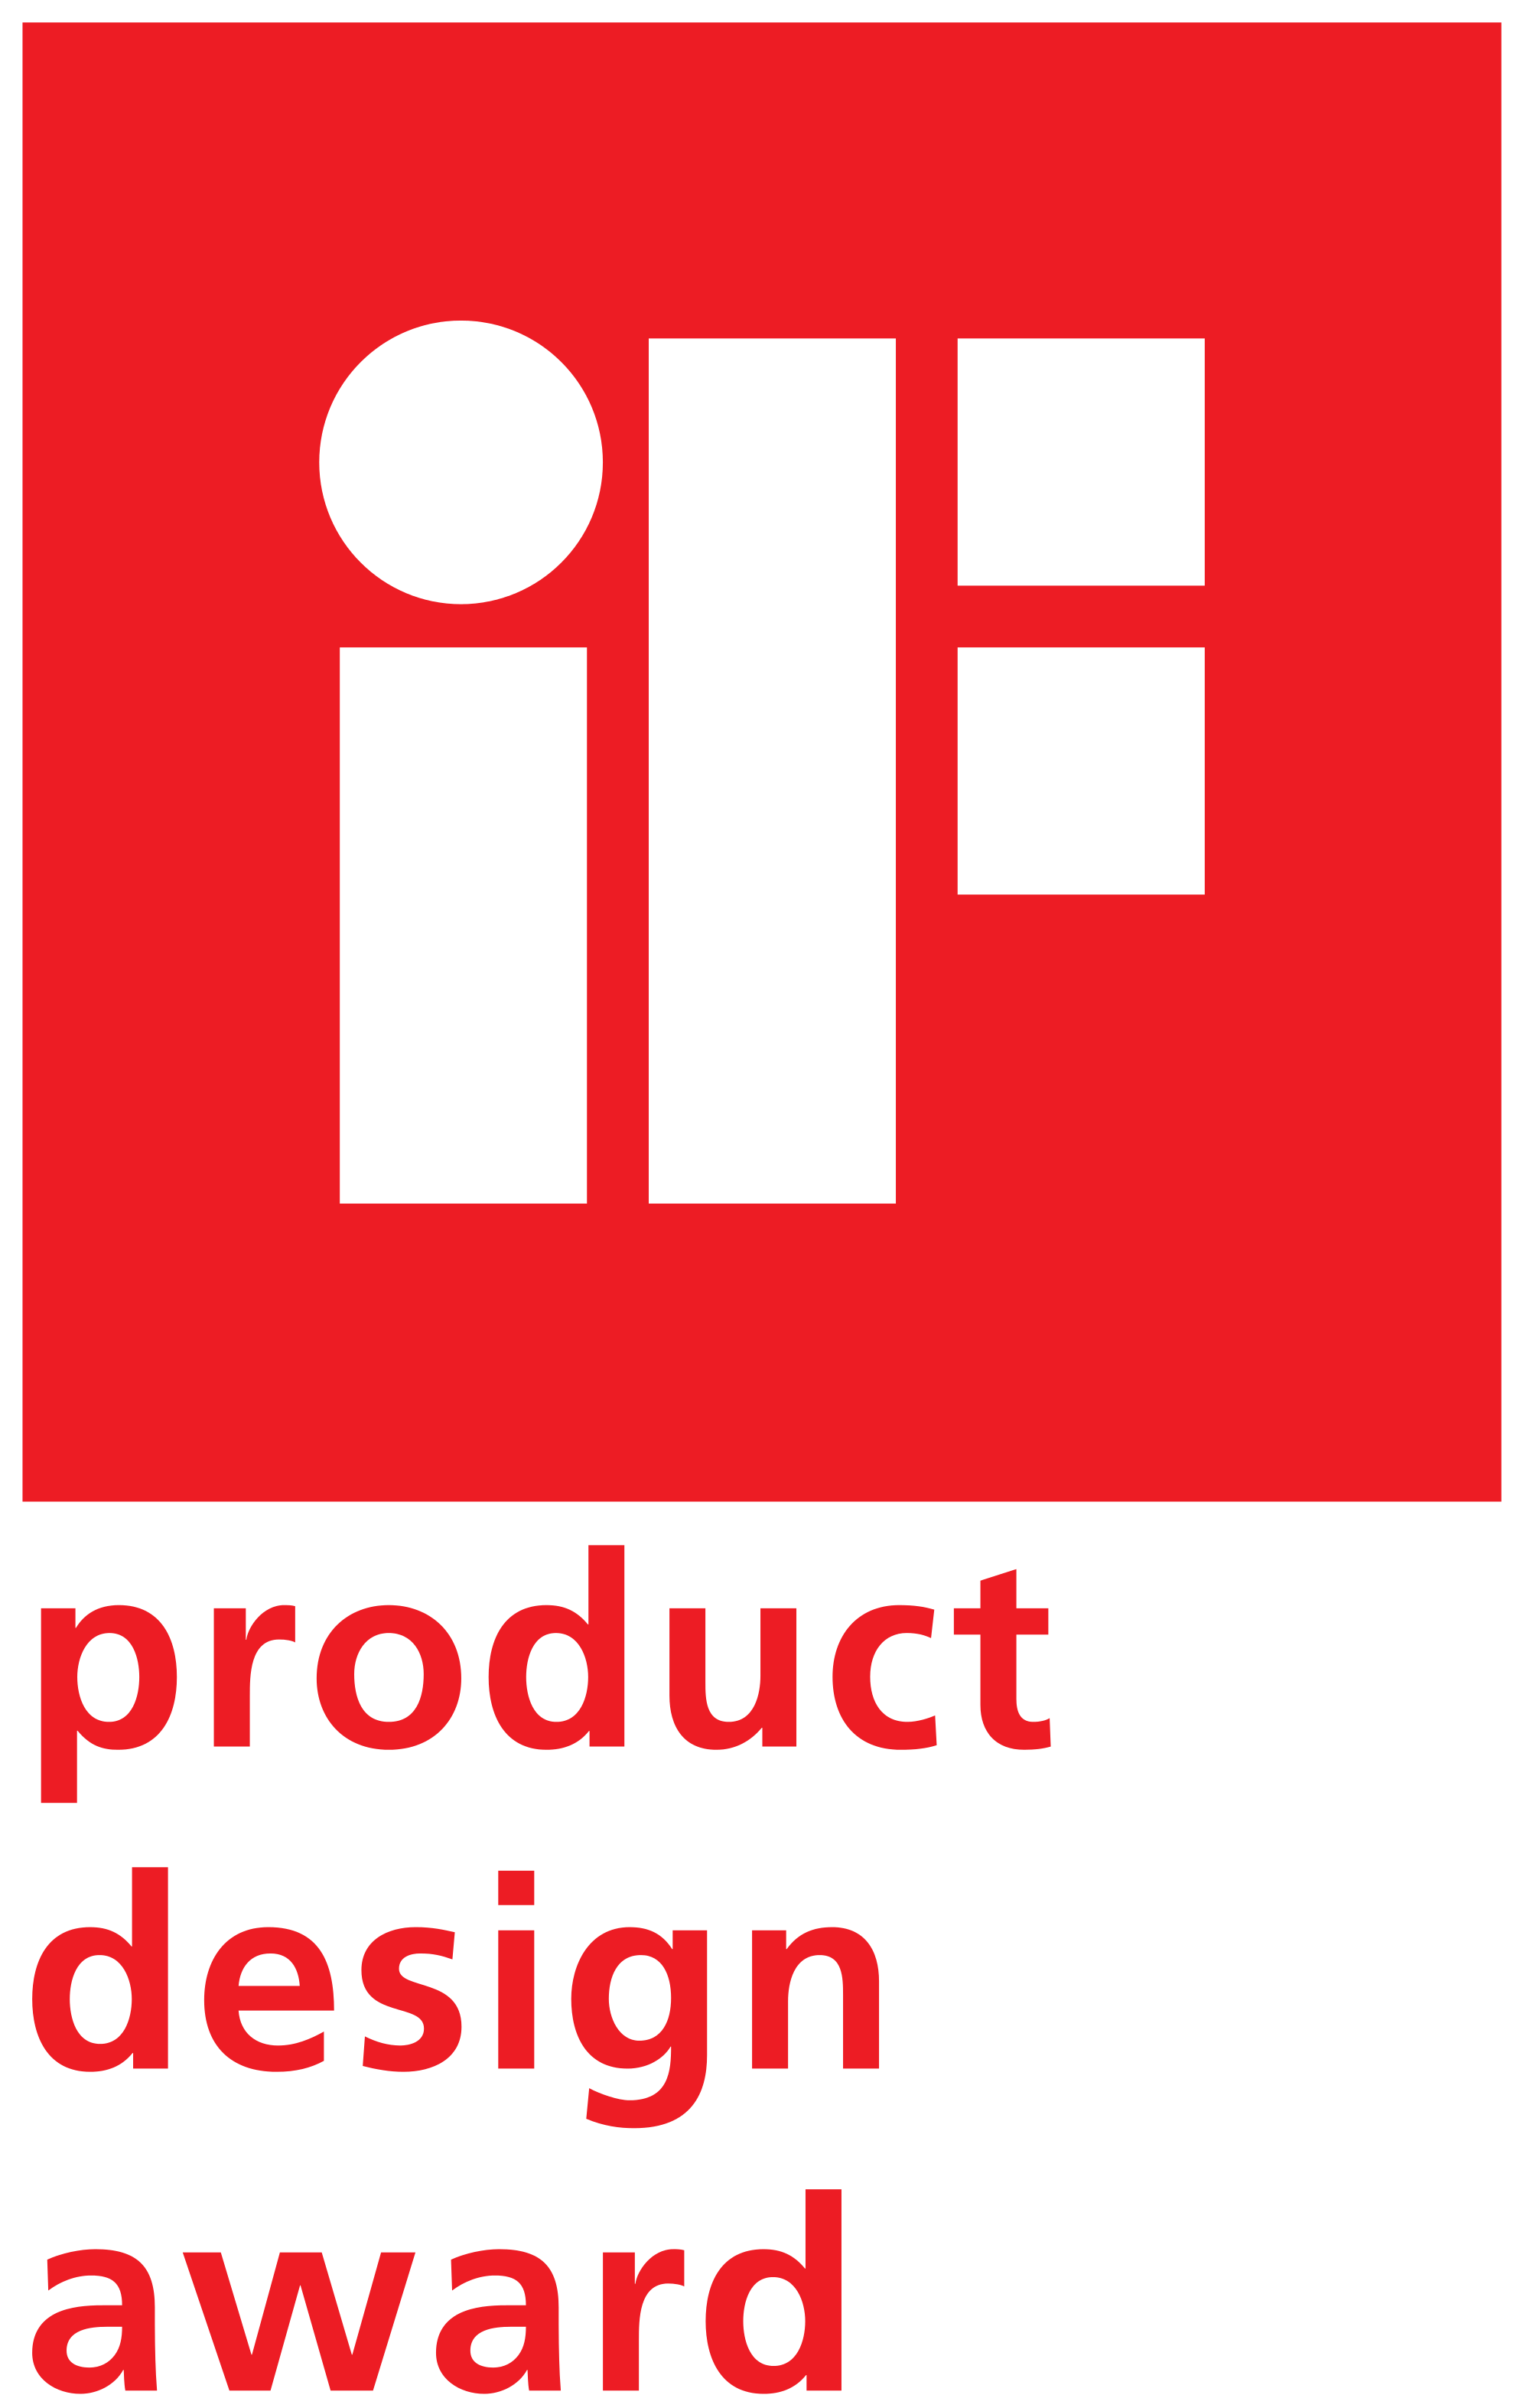 If I with Red Logo - File:IF-Product-Design-Award-Logo.svg - Wikimedia Commons